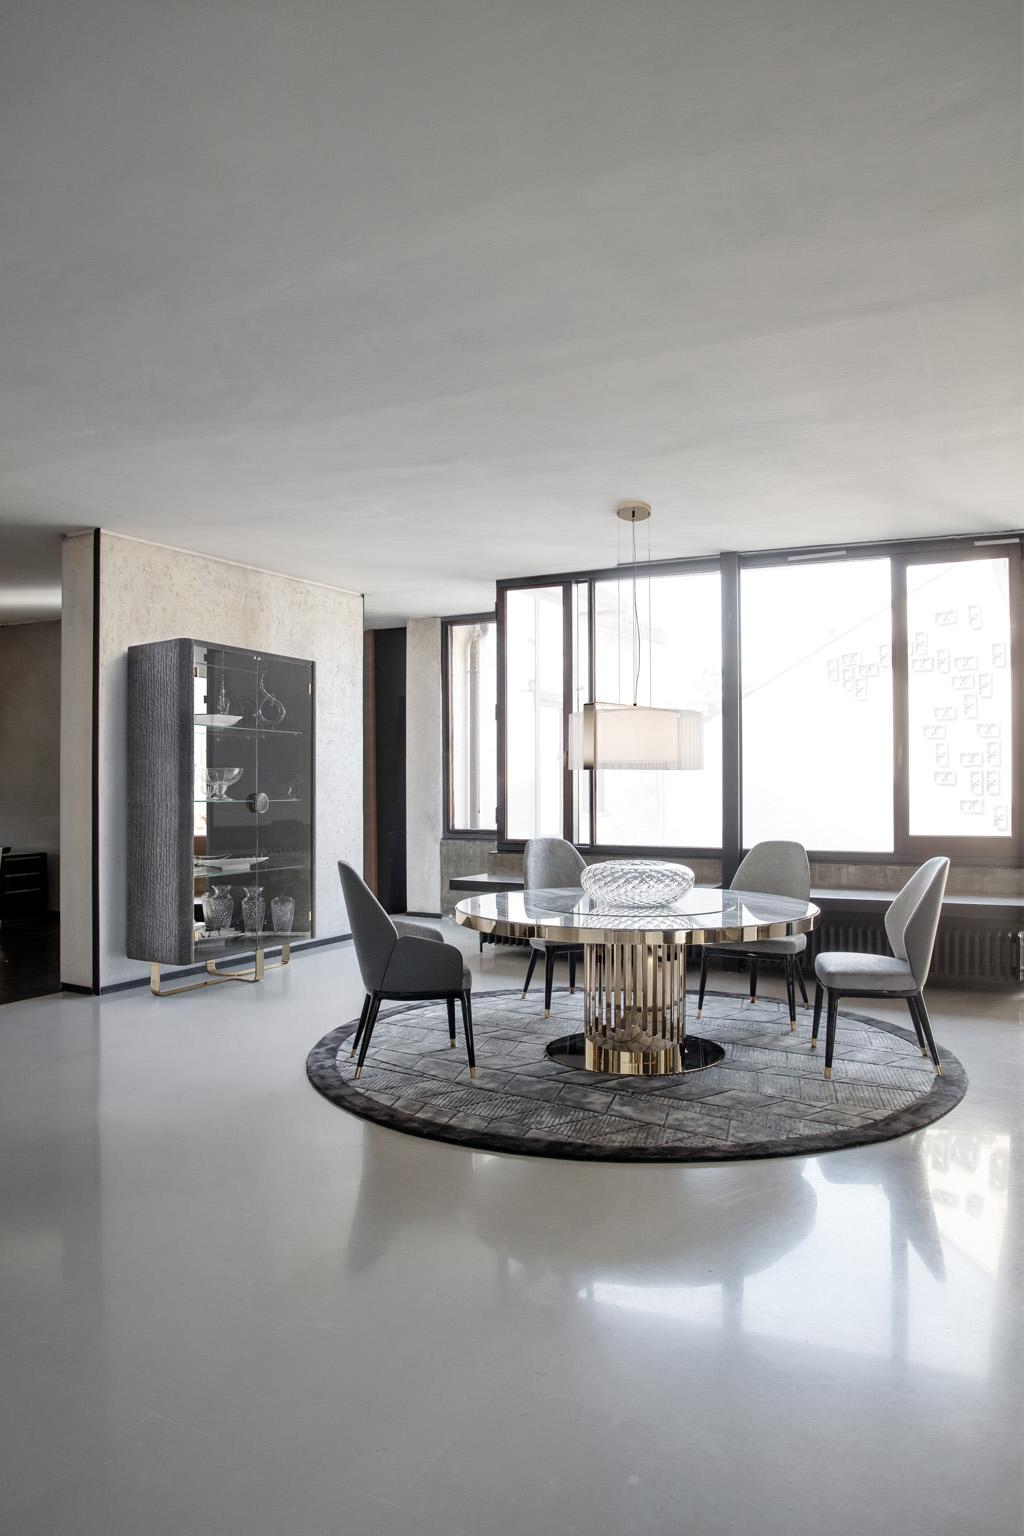 Round table in light gold chrome stainless steel with marble top.
Lazy susan inserted of diam. cm 100 in marble grey Alpi.
Giorgio Collection logo on the metal base.
Size: diam. cm 180 x 76 H
Size: diam. 71’’ x 30’’H.